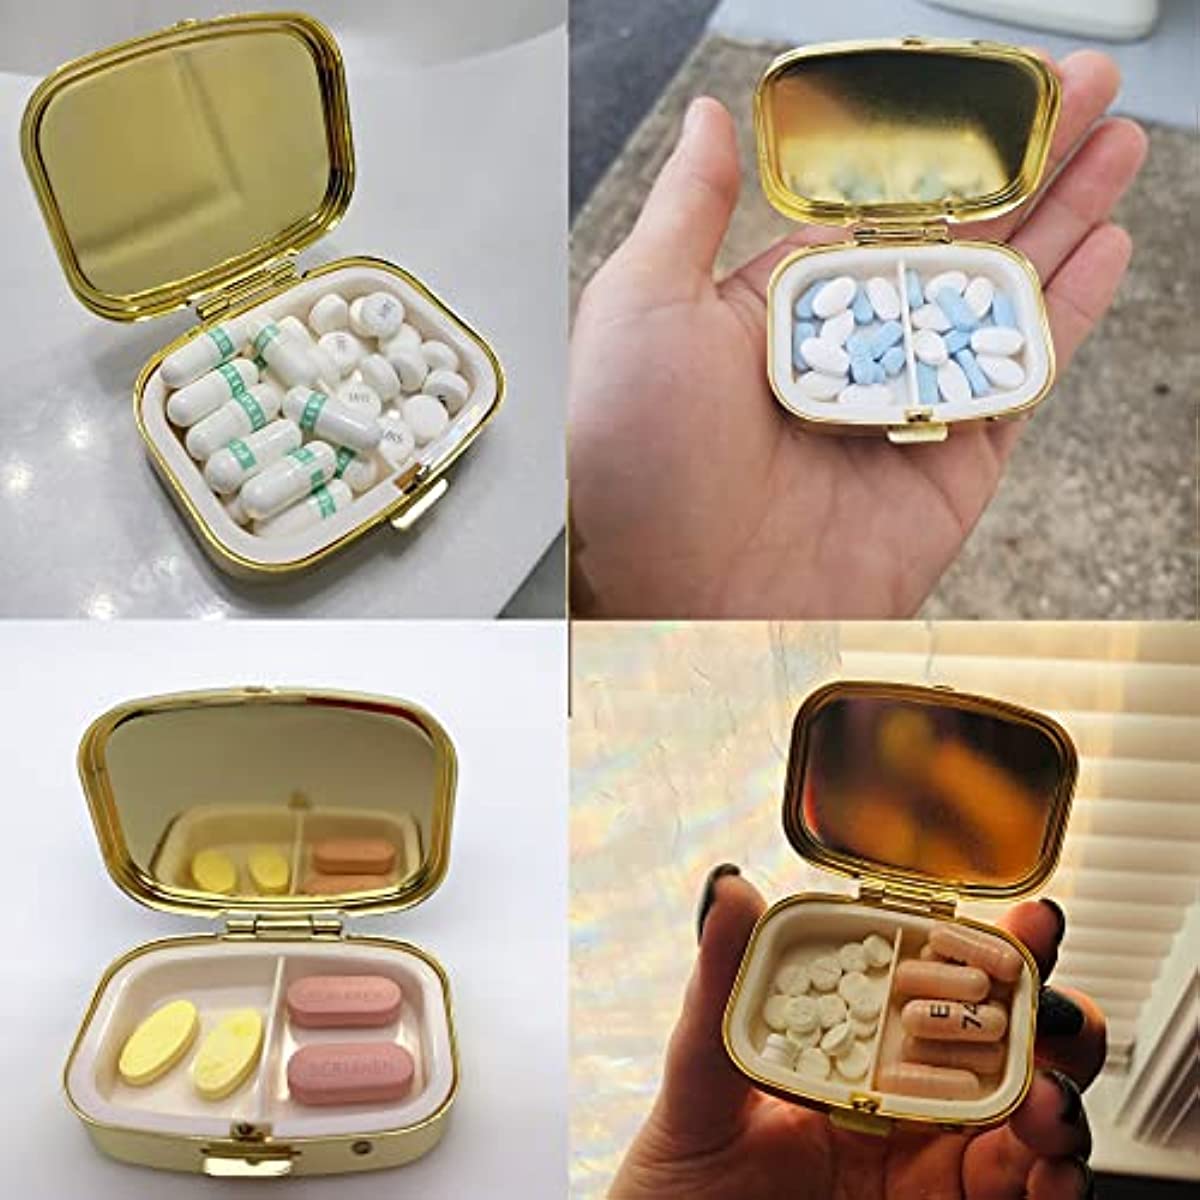 AmyZone Metal Pill Organizer Travel Friendly Portable Compact Pill Box Cute Pill Case to Hold Vitamins/Tylenol/Fish Oil/Supplements/Meds/Tablet for Purse/Pocket(Sweet)